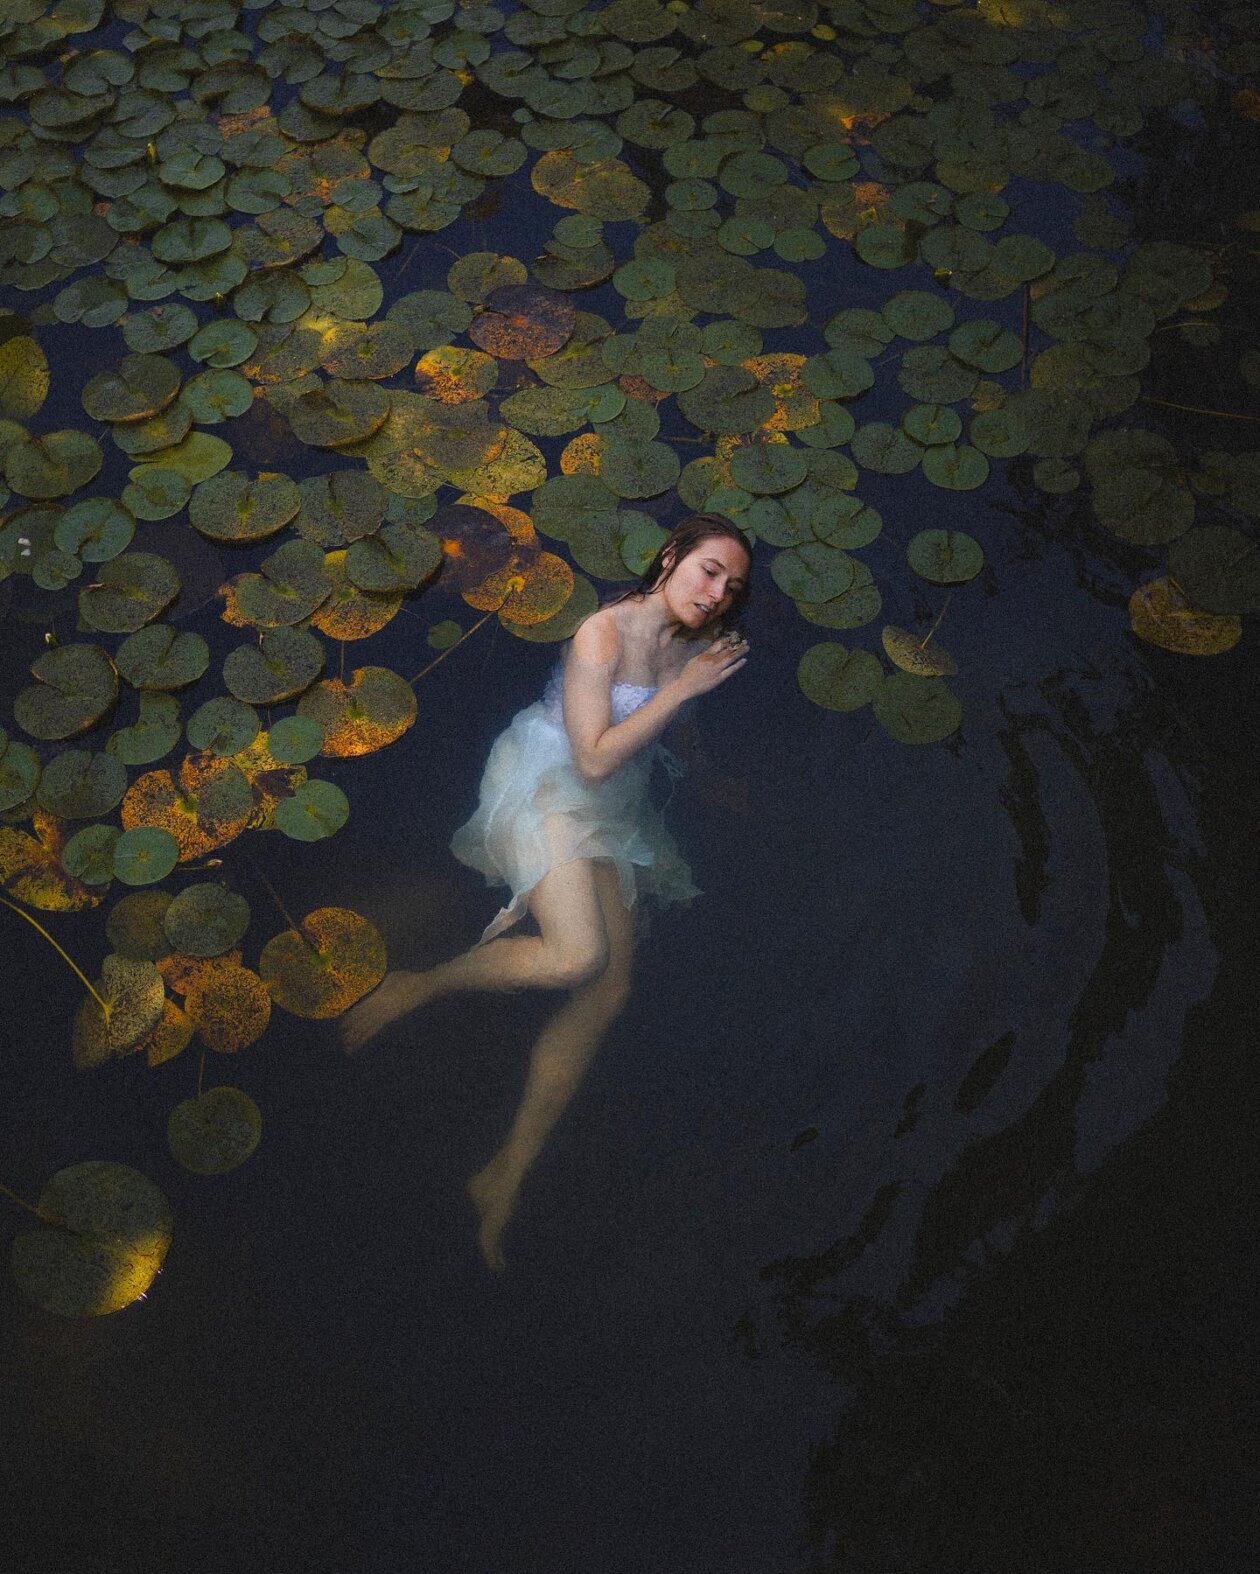 The Ethereal Female Photography Of Jenny Kaiser (6)